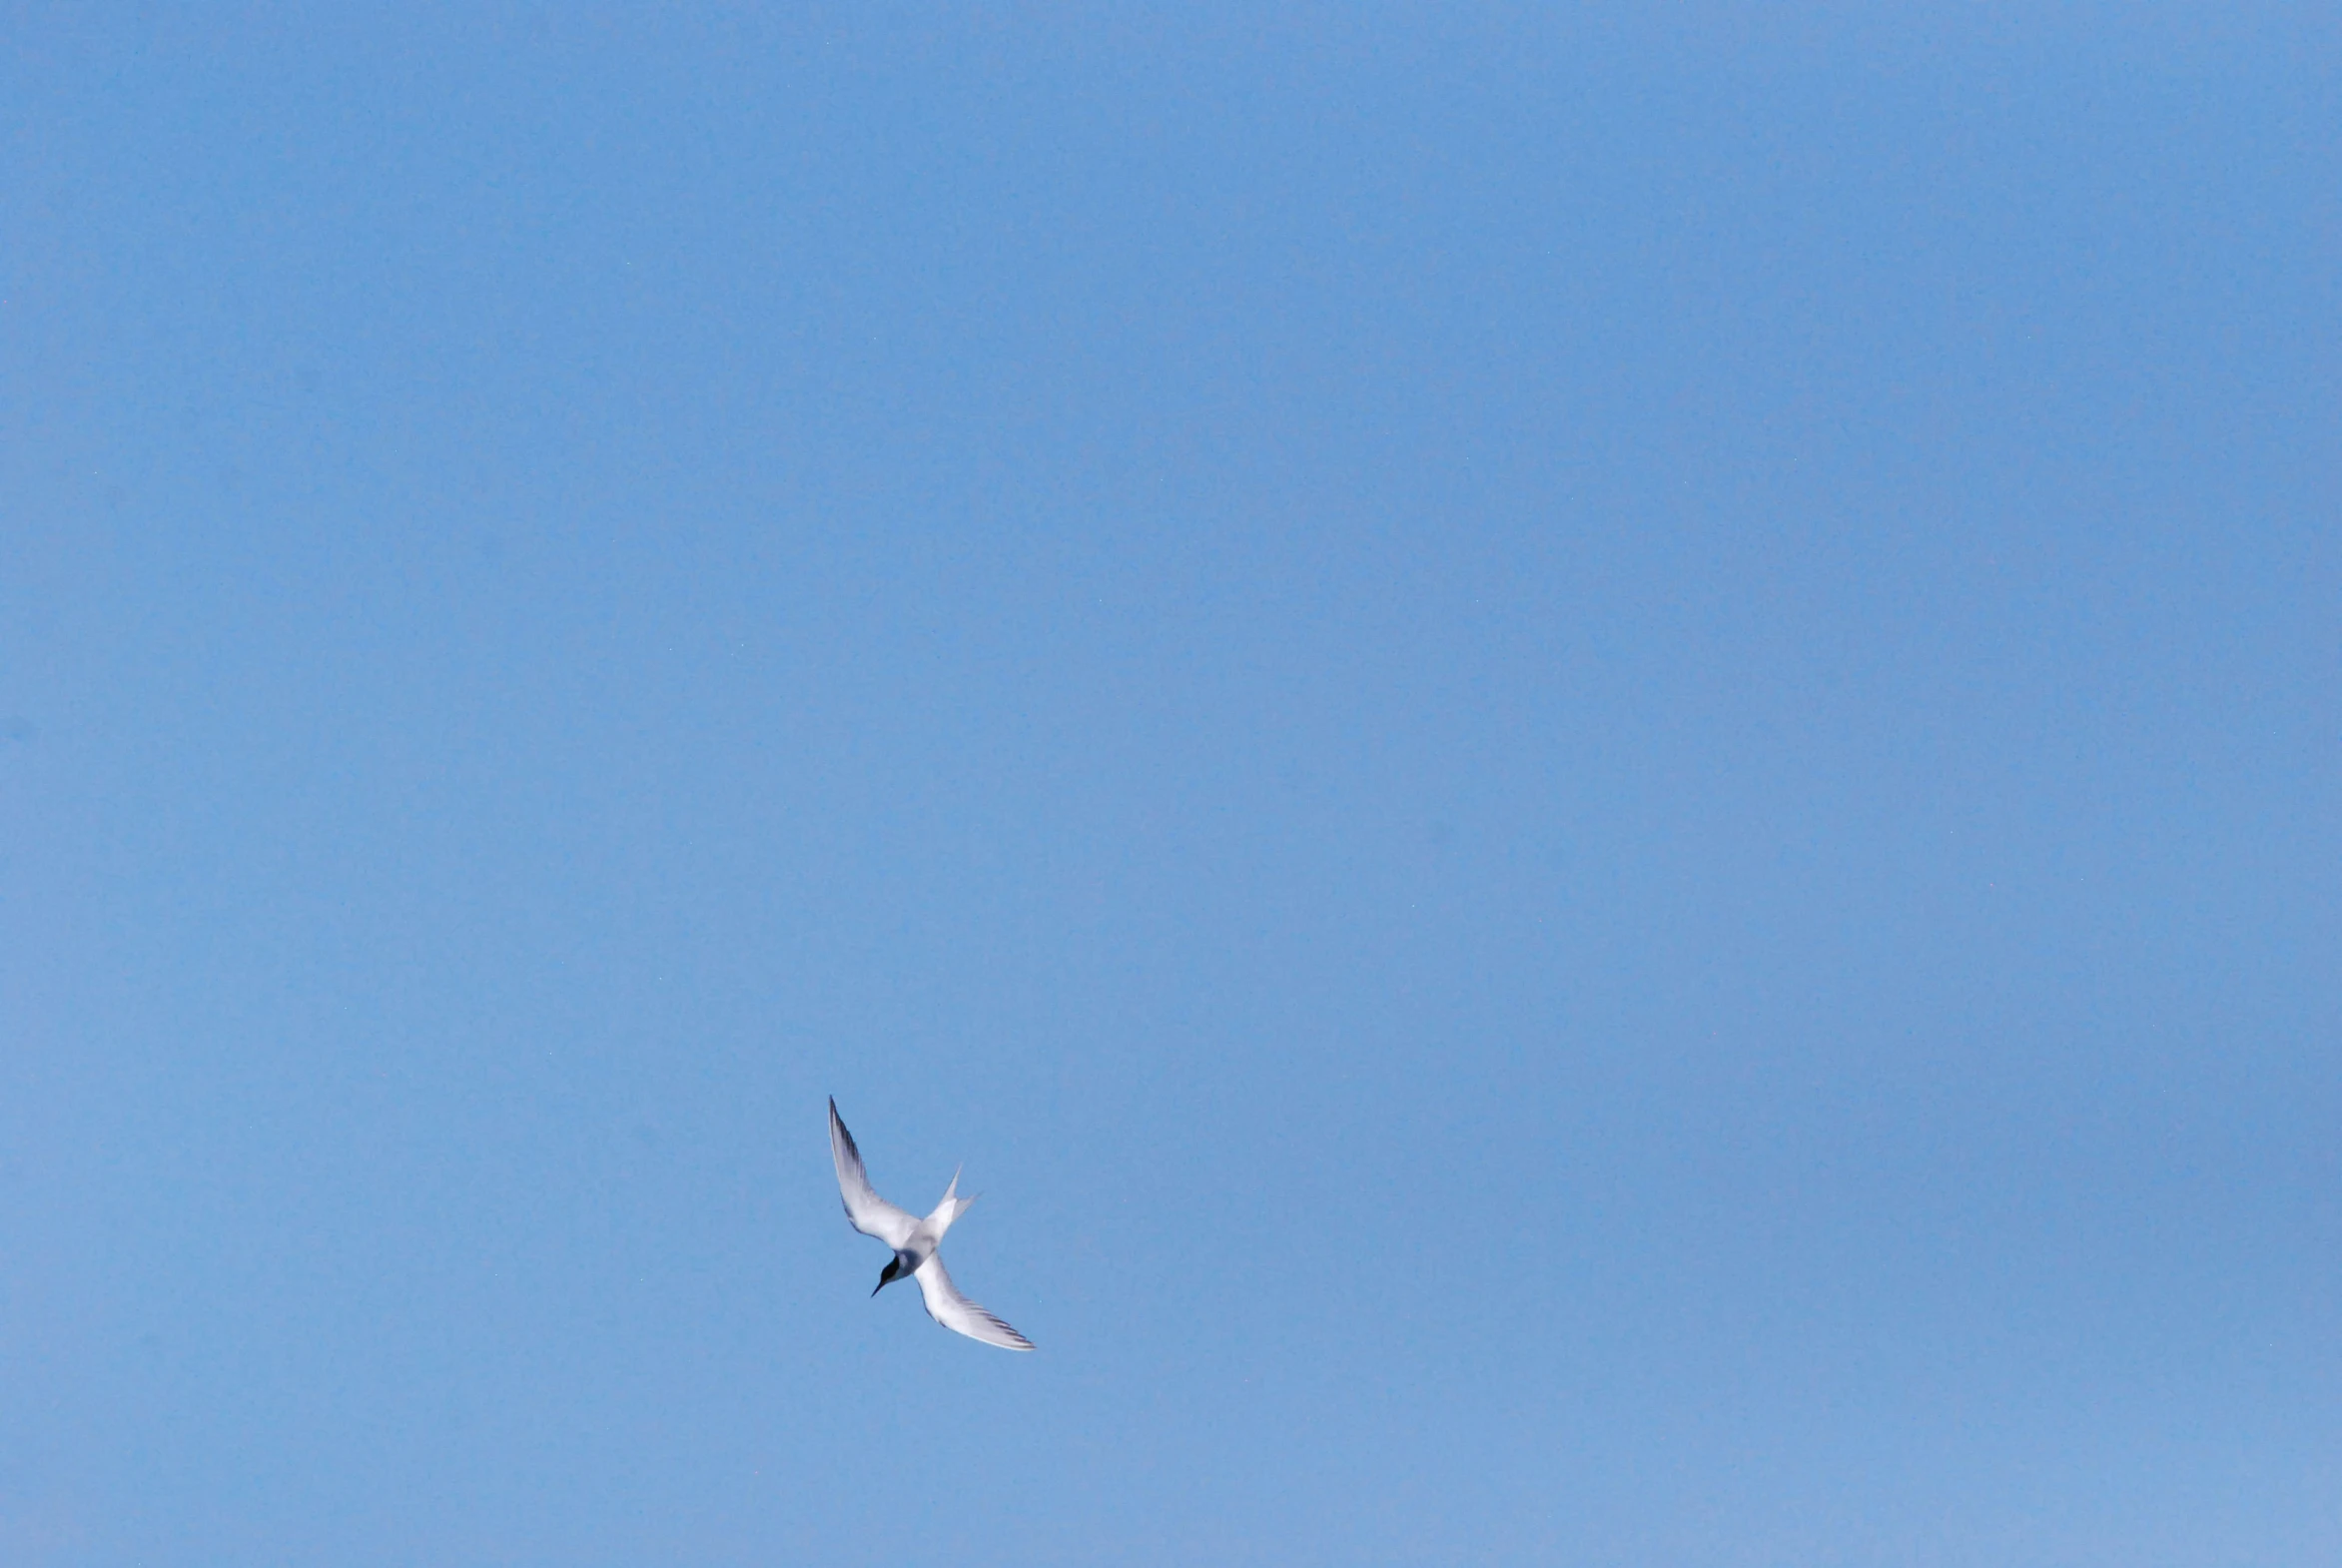 an oceangull flying above on a clear day